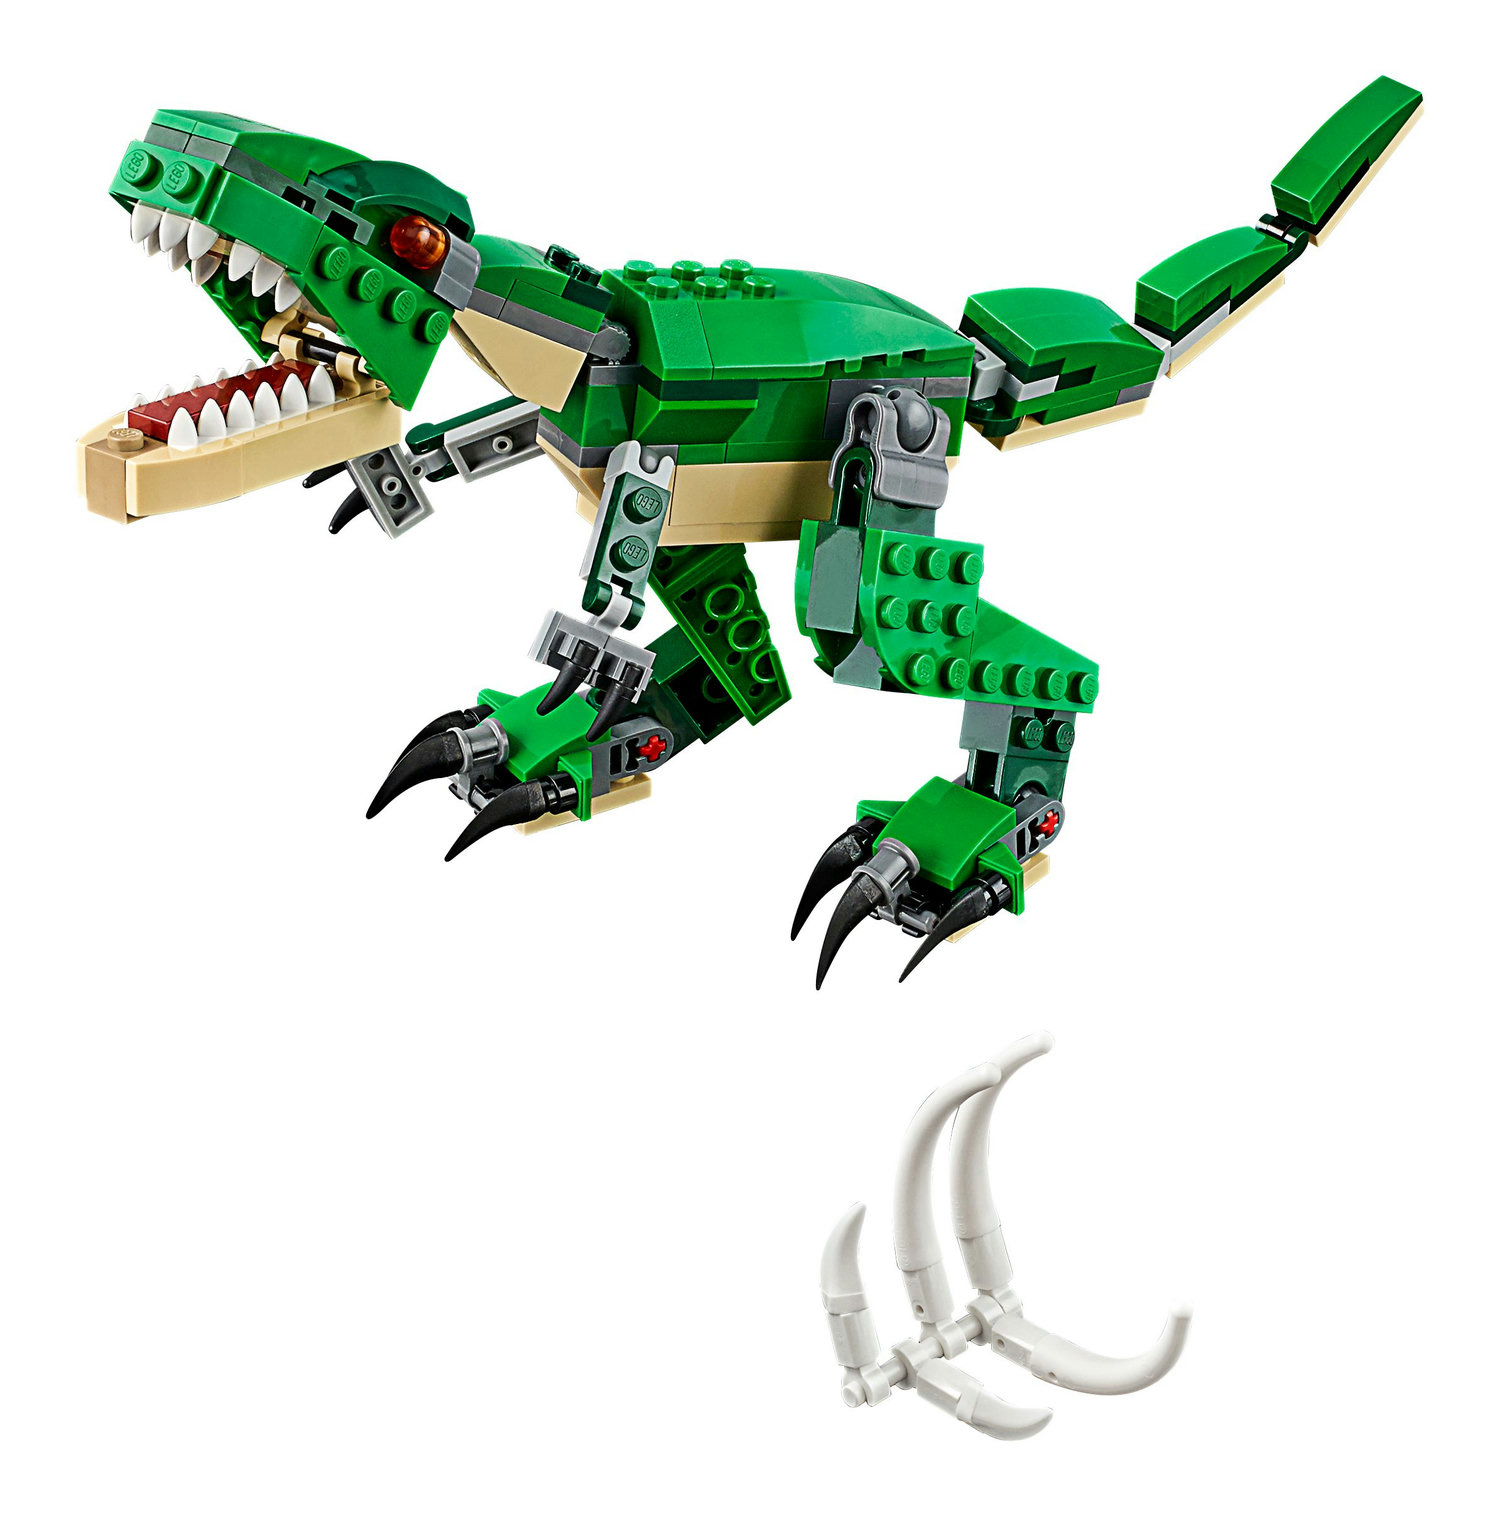 LEGO Creator 3 in 1 Mighty Dinosaur Toy, Transforms from T. rex to Triceratops to Pterodactyl Dinosaur Figures, Great Gift for 7 - 12 Year Old Boys & Girls, 31058 - image 4 of 4